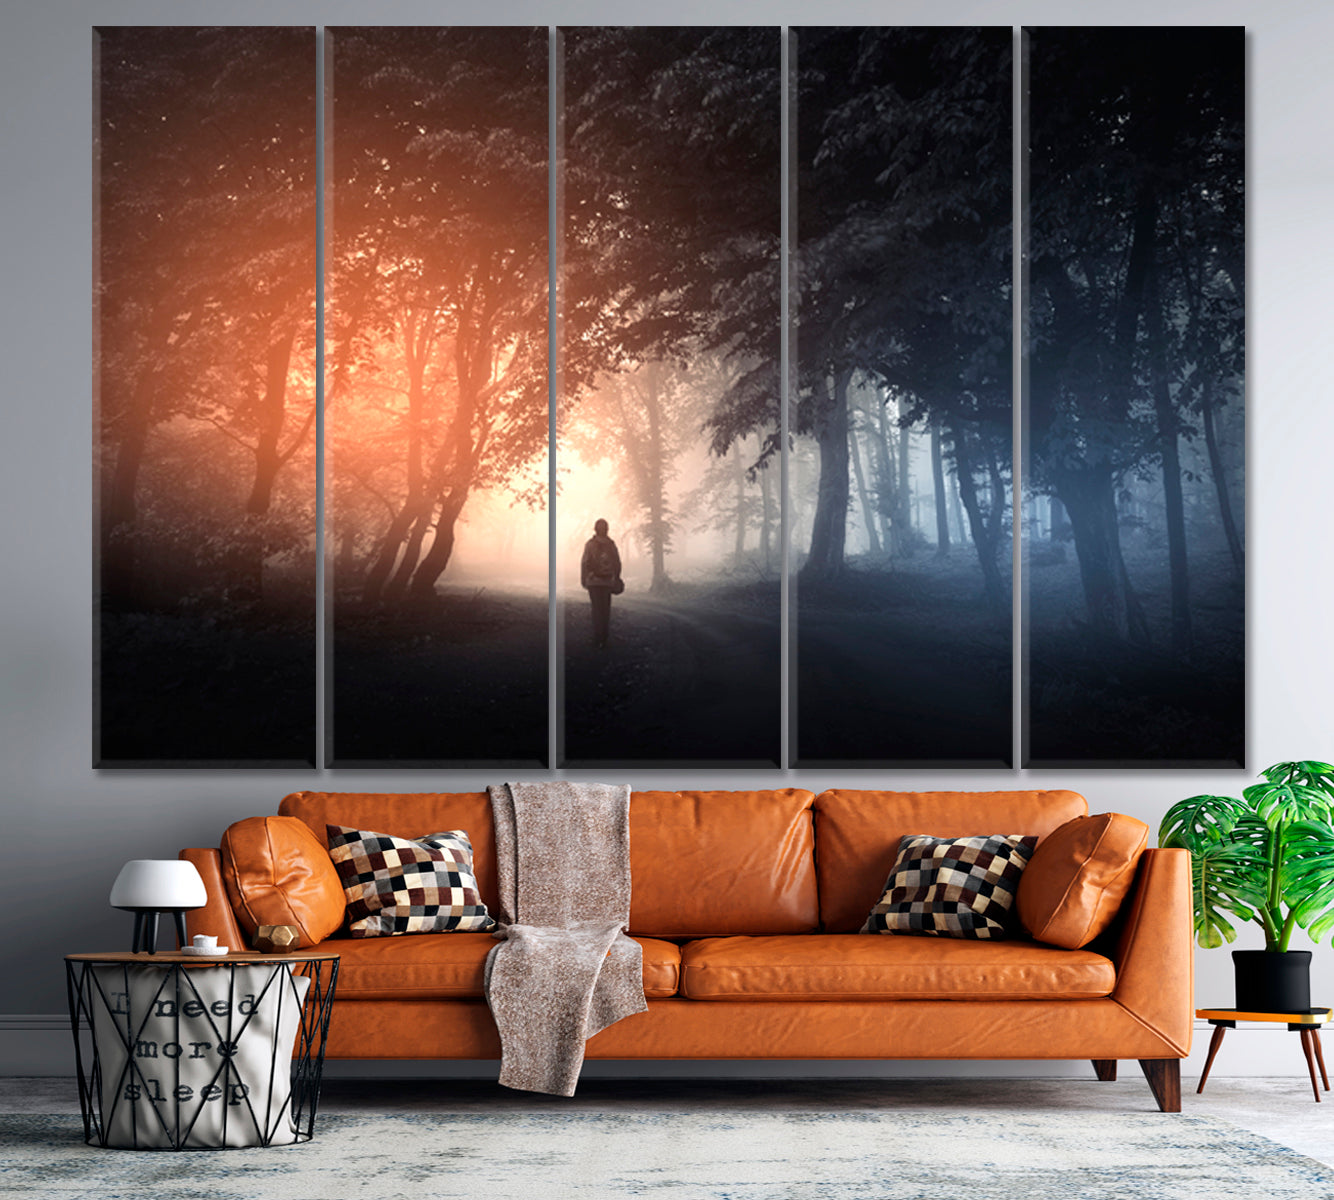 PATH TO THE LIGHT Mysterious Landscape Fantastic Surreal Misty Forest Trees Man Walking on the Path Scenery Landscape Fine Art Print Artesty 5 panels 36" x 24" 